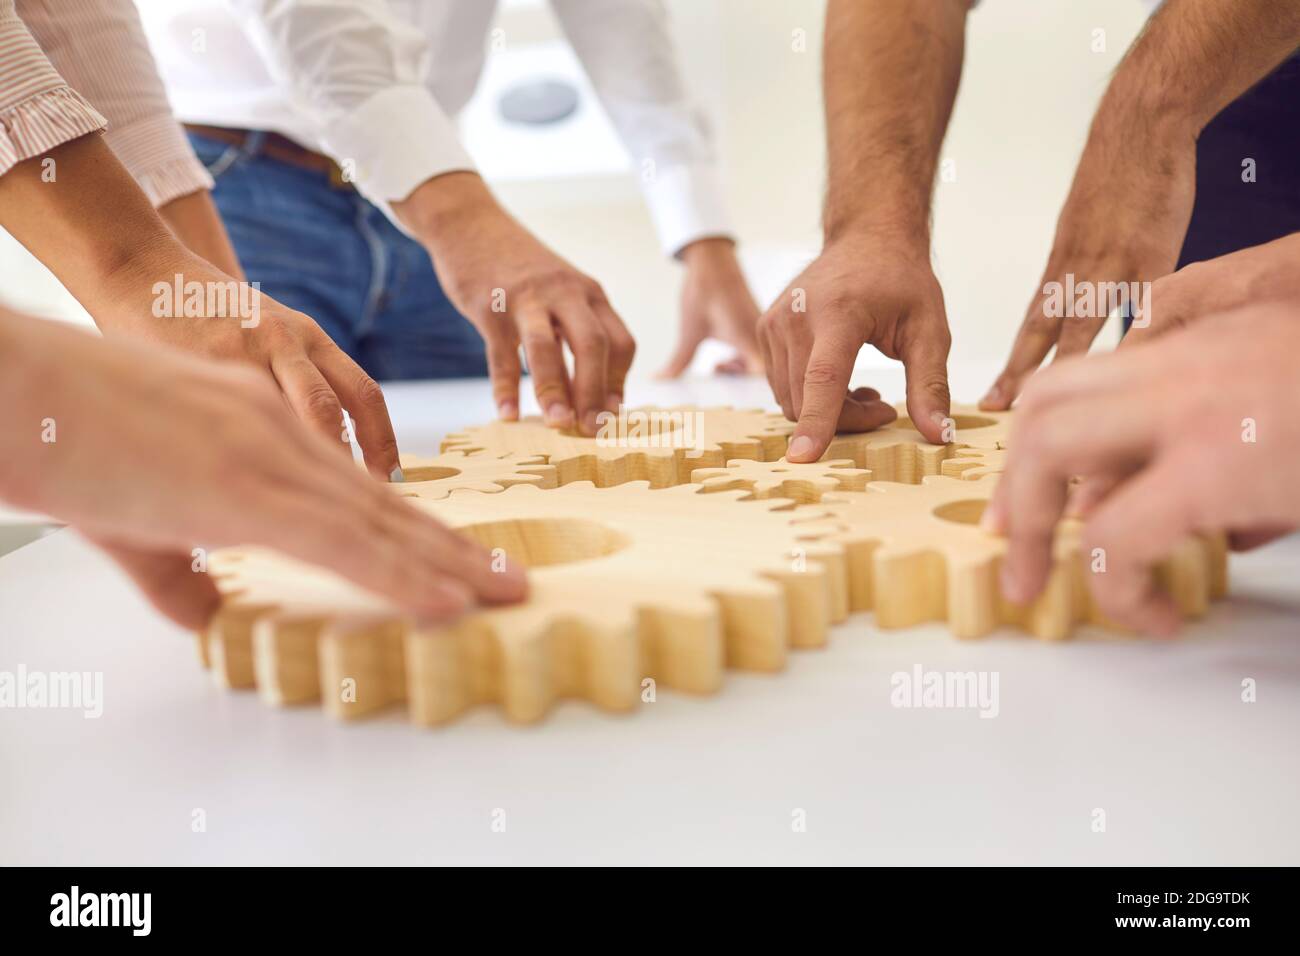 Hands of business people making whole picture of wooden gears on table together Stock Photo